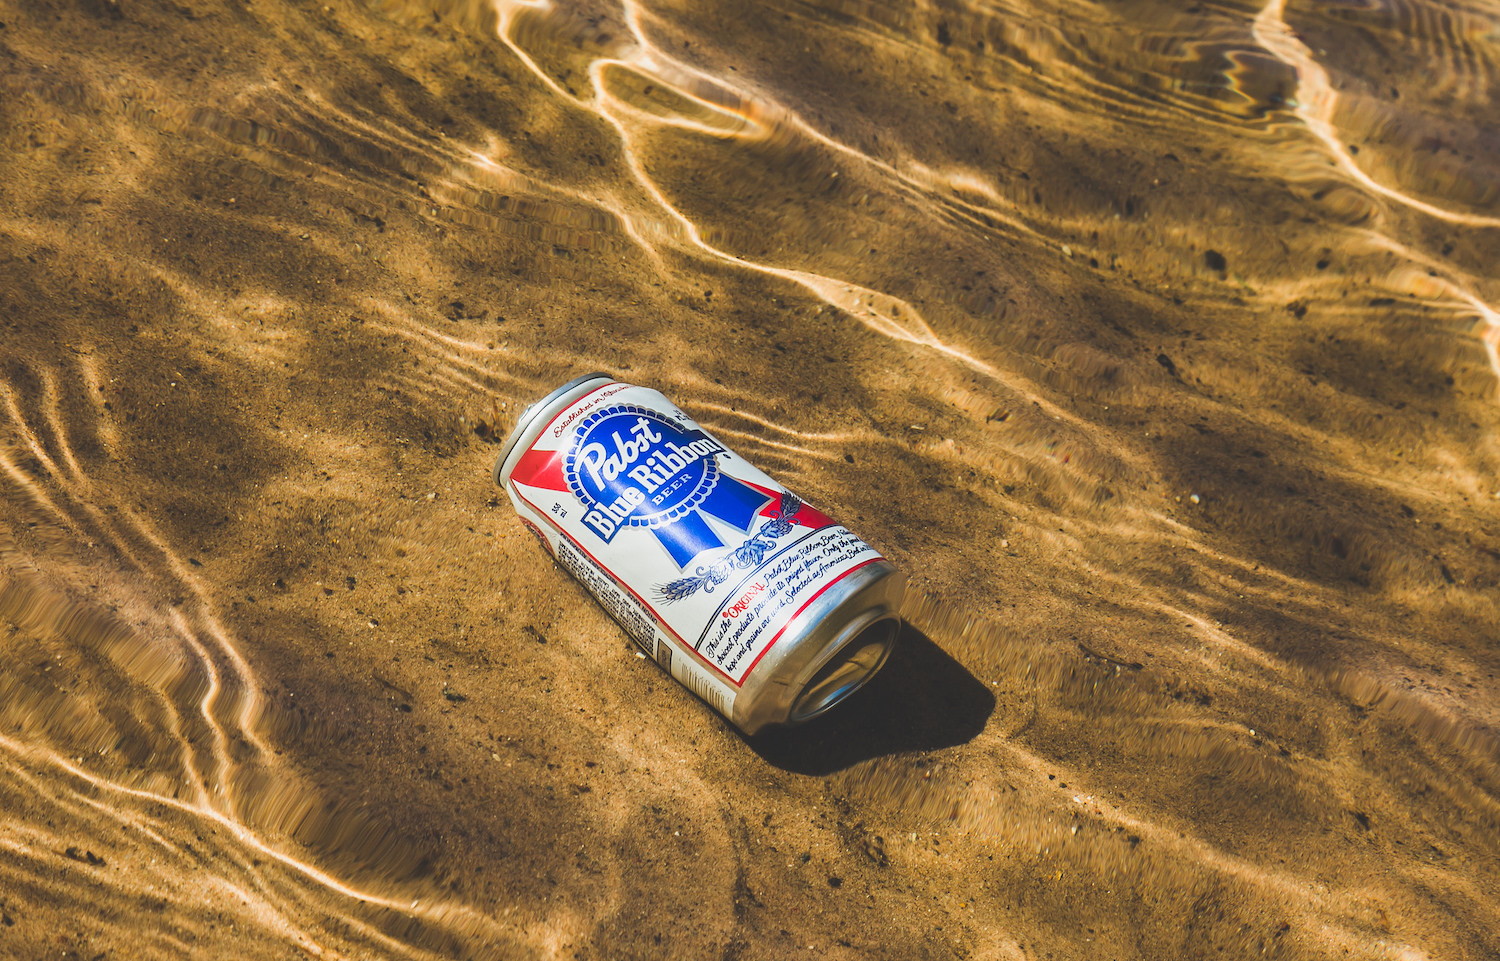 Pabst Blue Ribbon beer may be meeting its end if Miller stops brewing it. Credit: Tony Webster, November 2018